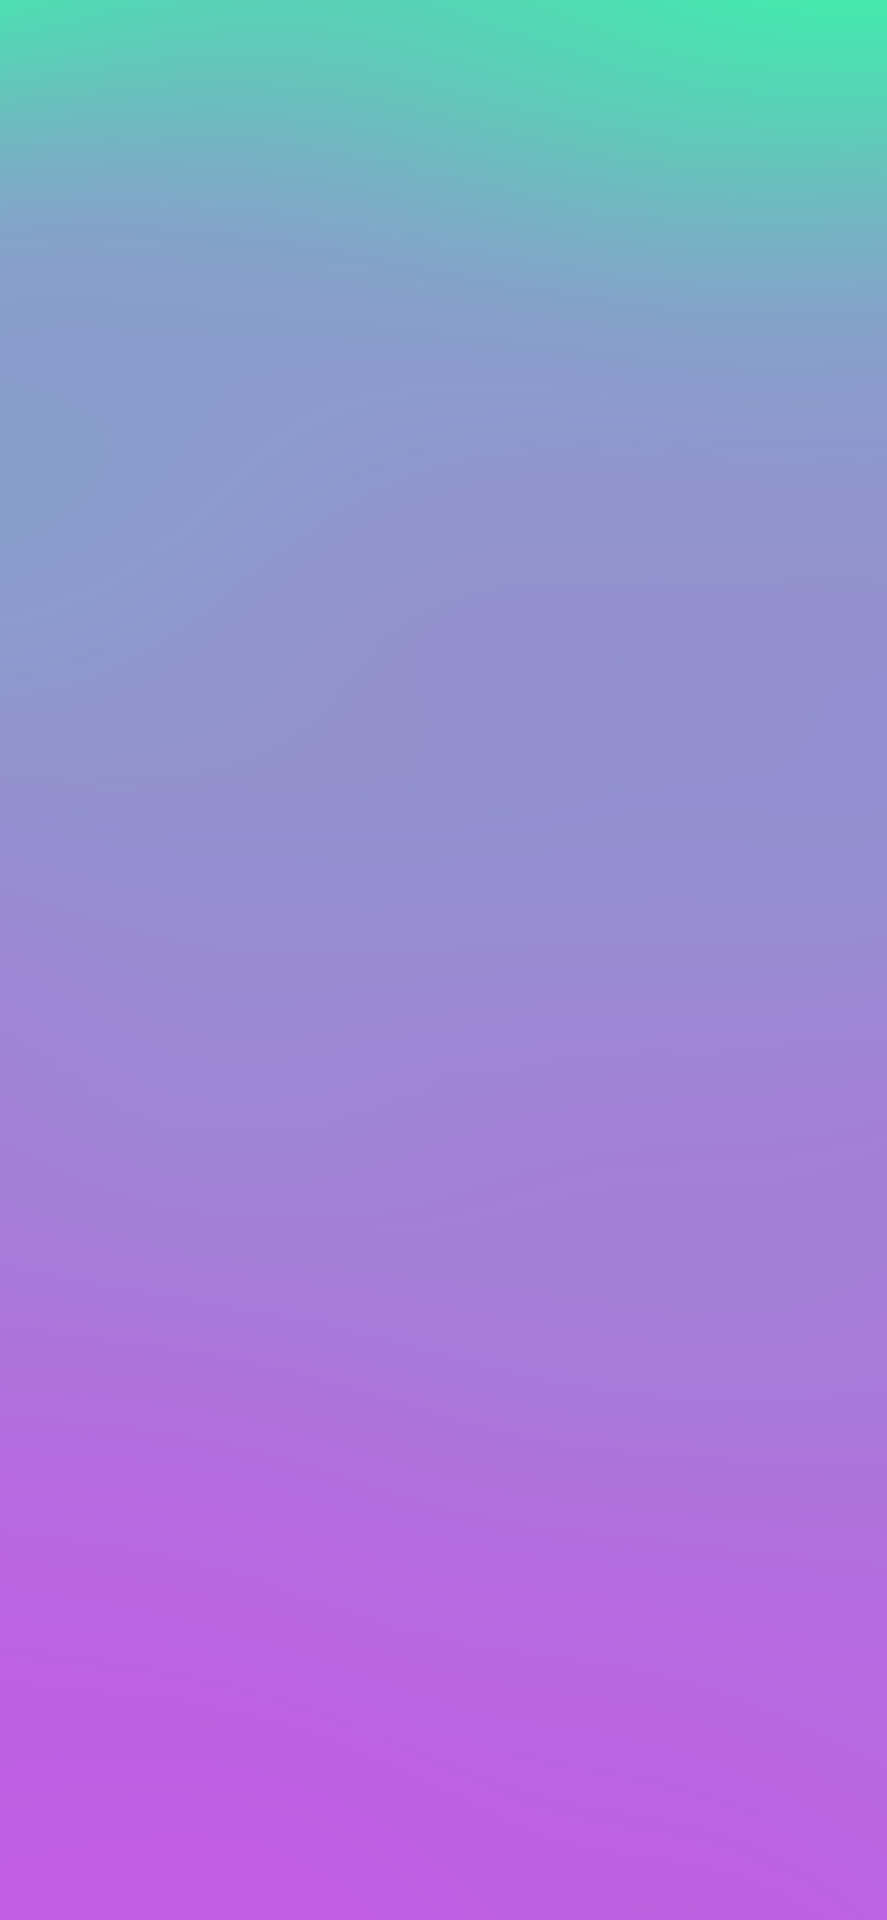 A Purple And Green Gradient Background